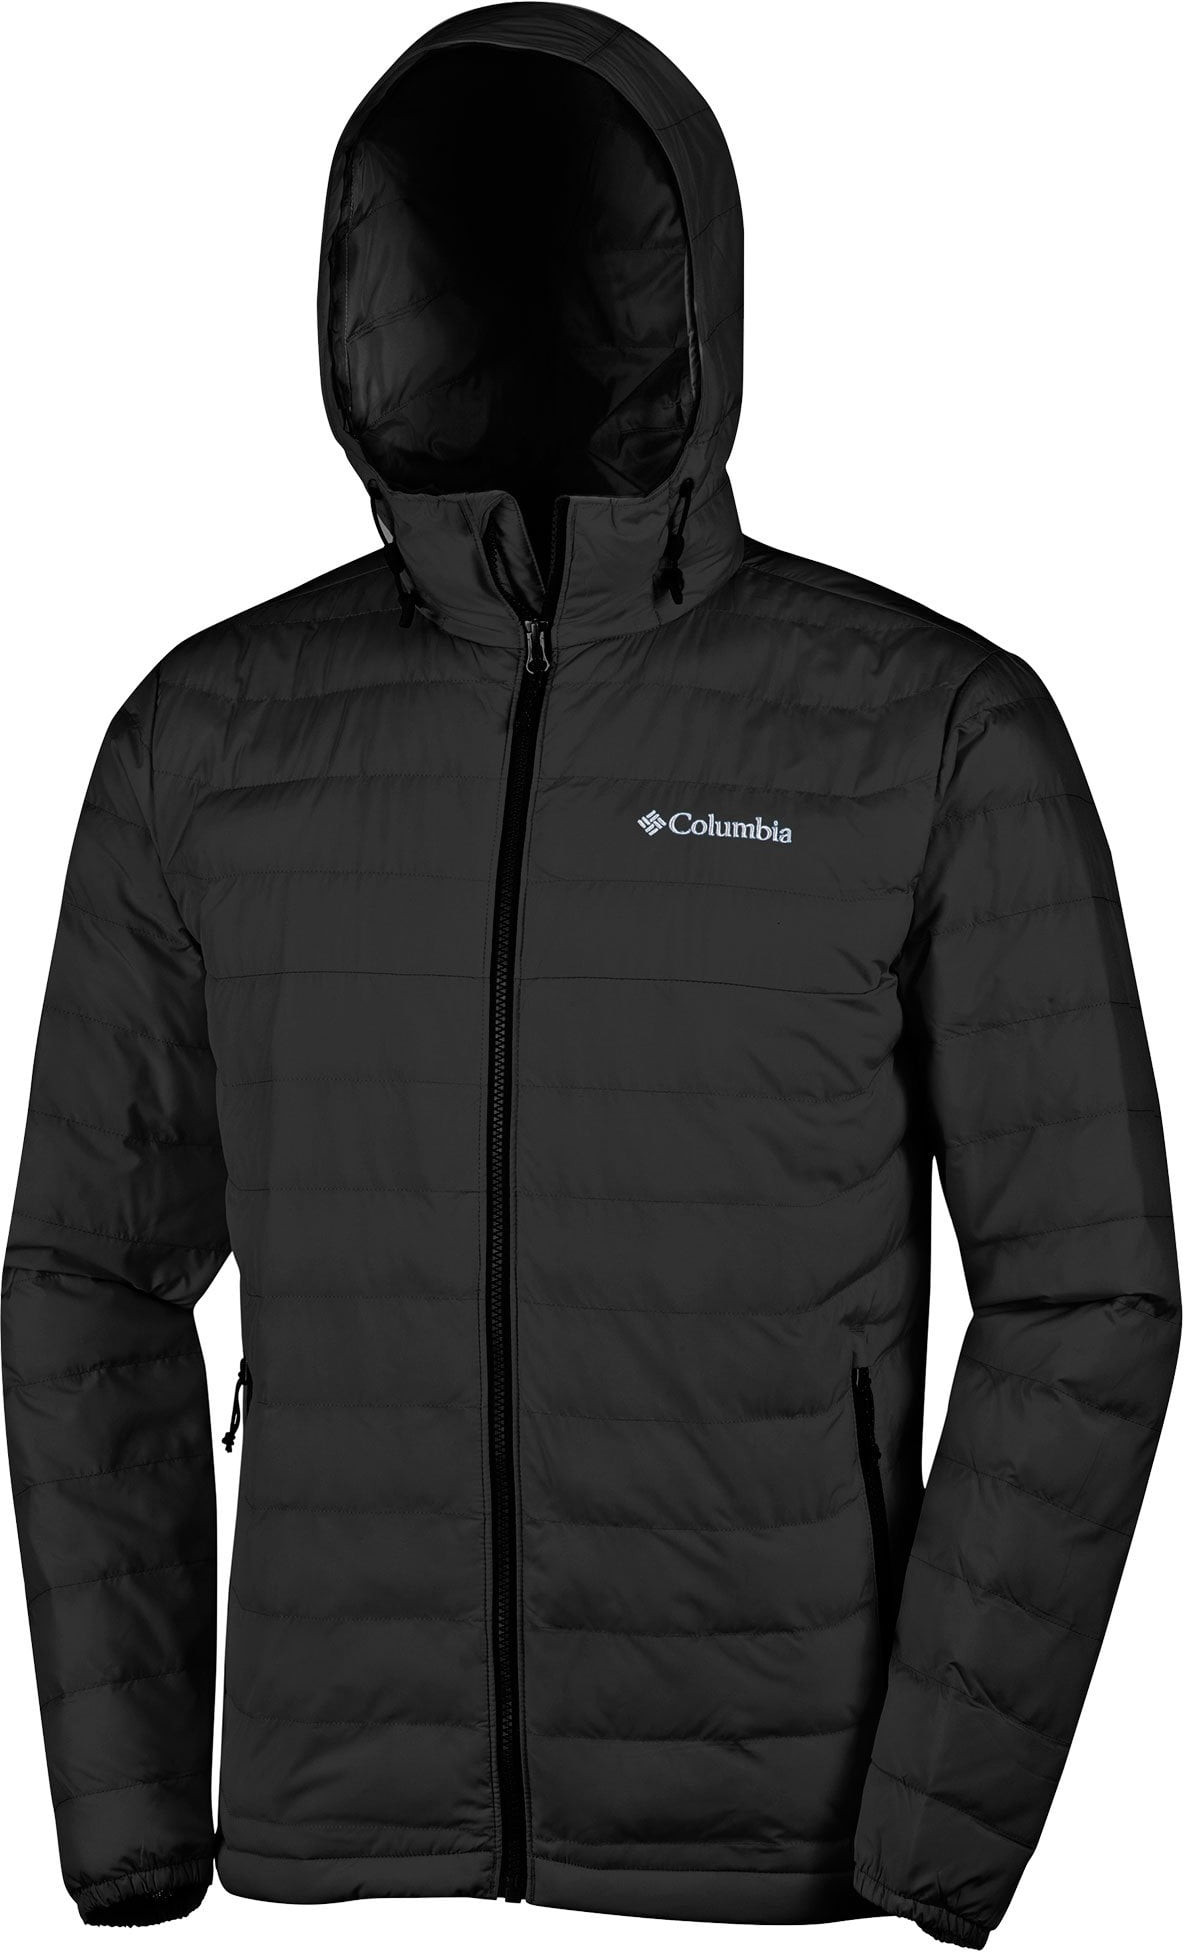 Unlock Wilderness' choice in the Columbia Vs North Face comparison, the Powder Lite™ Hooded Insulated Jacket by Columbia